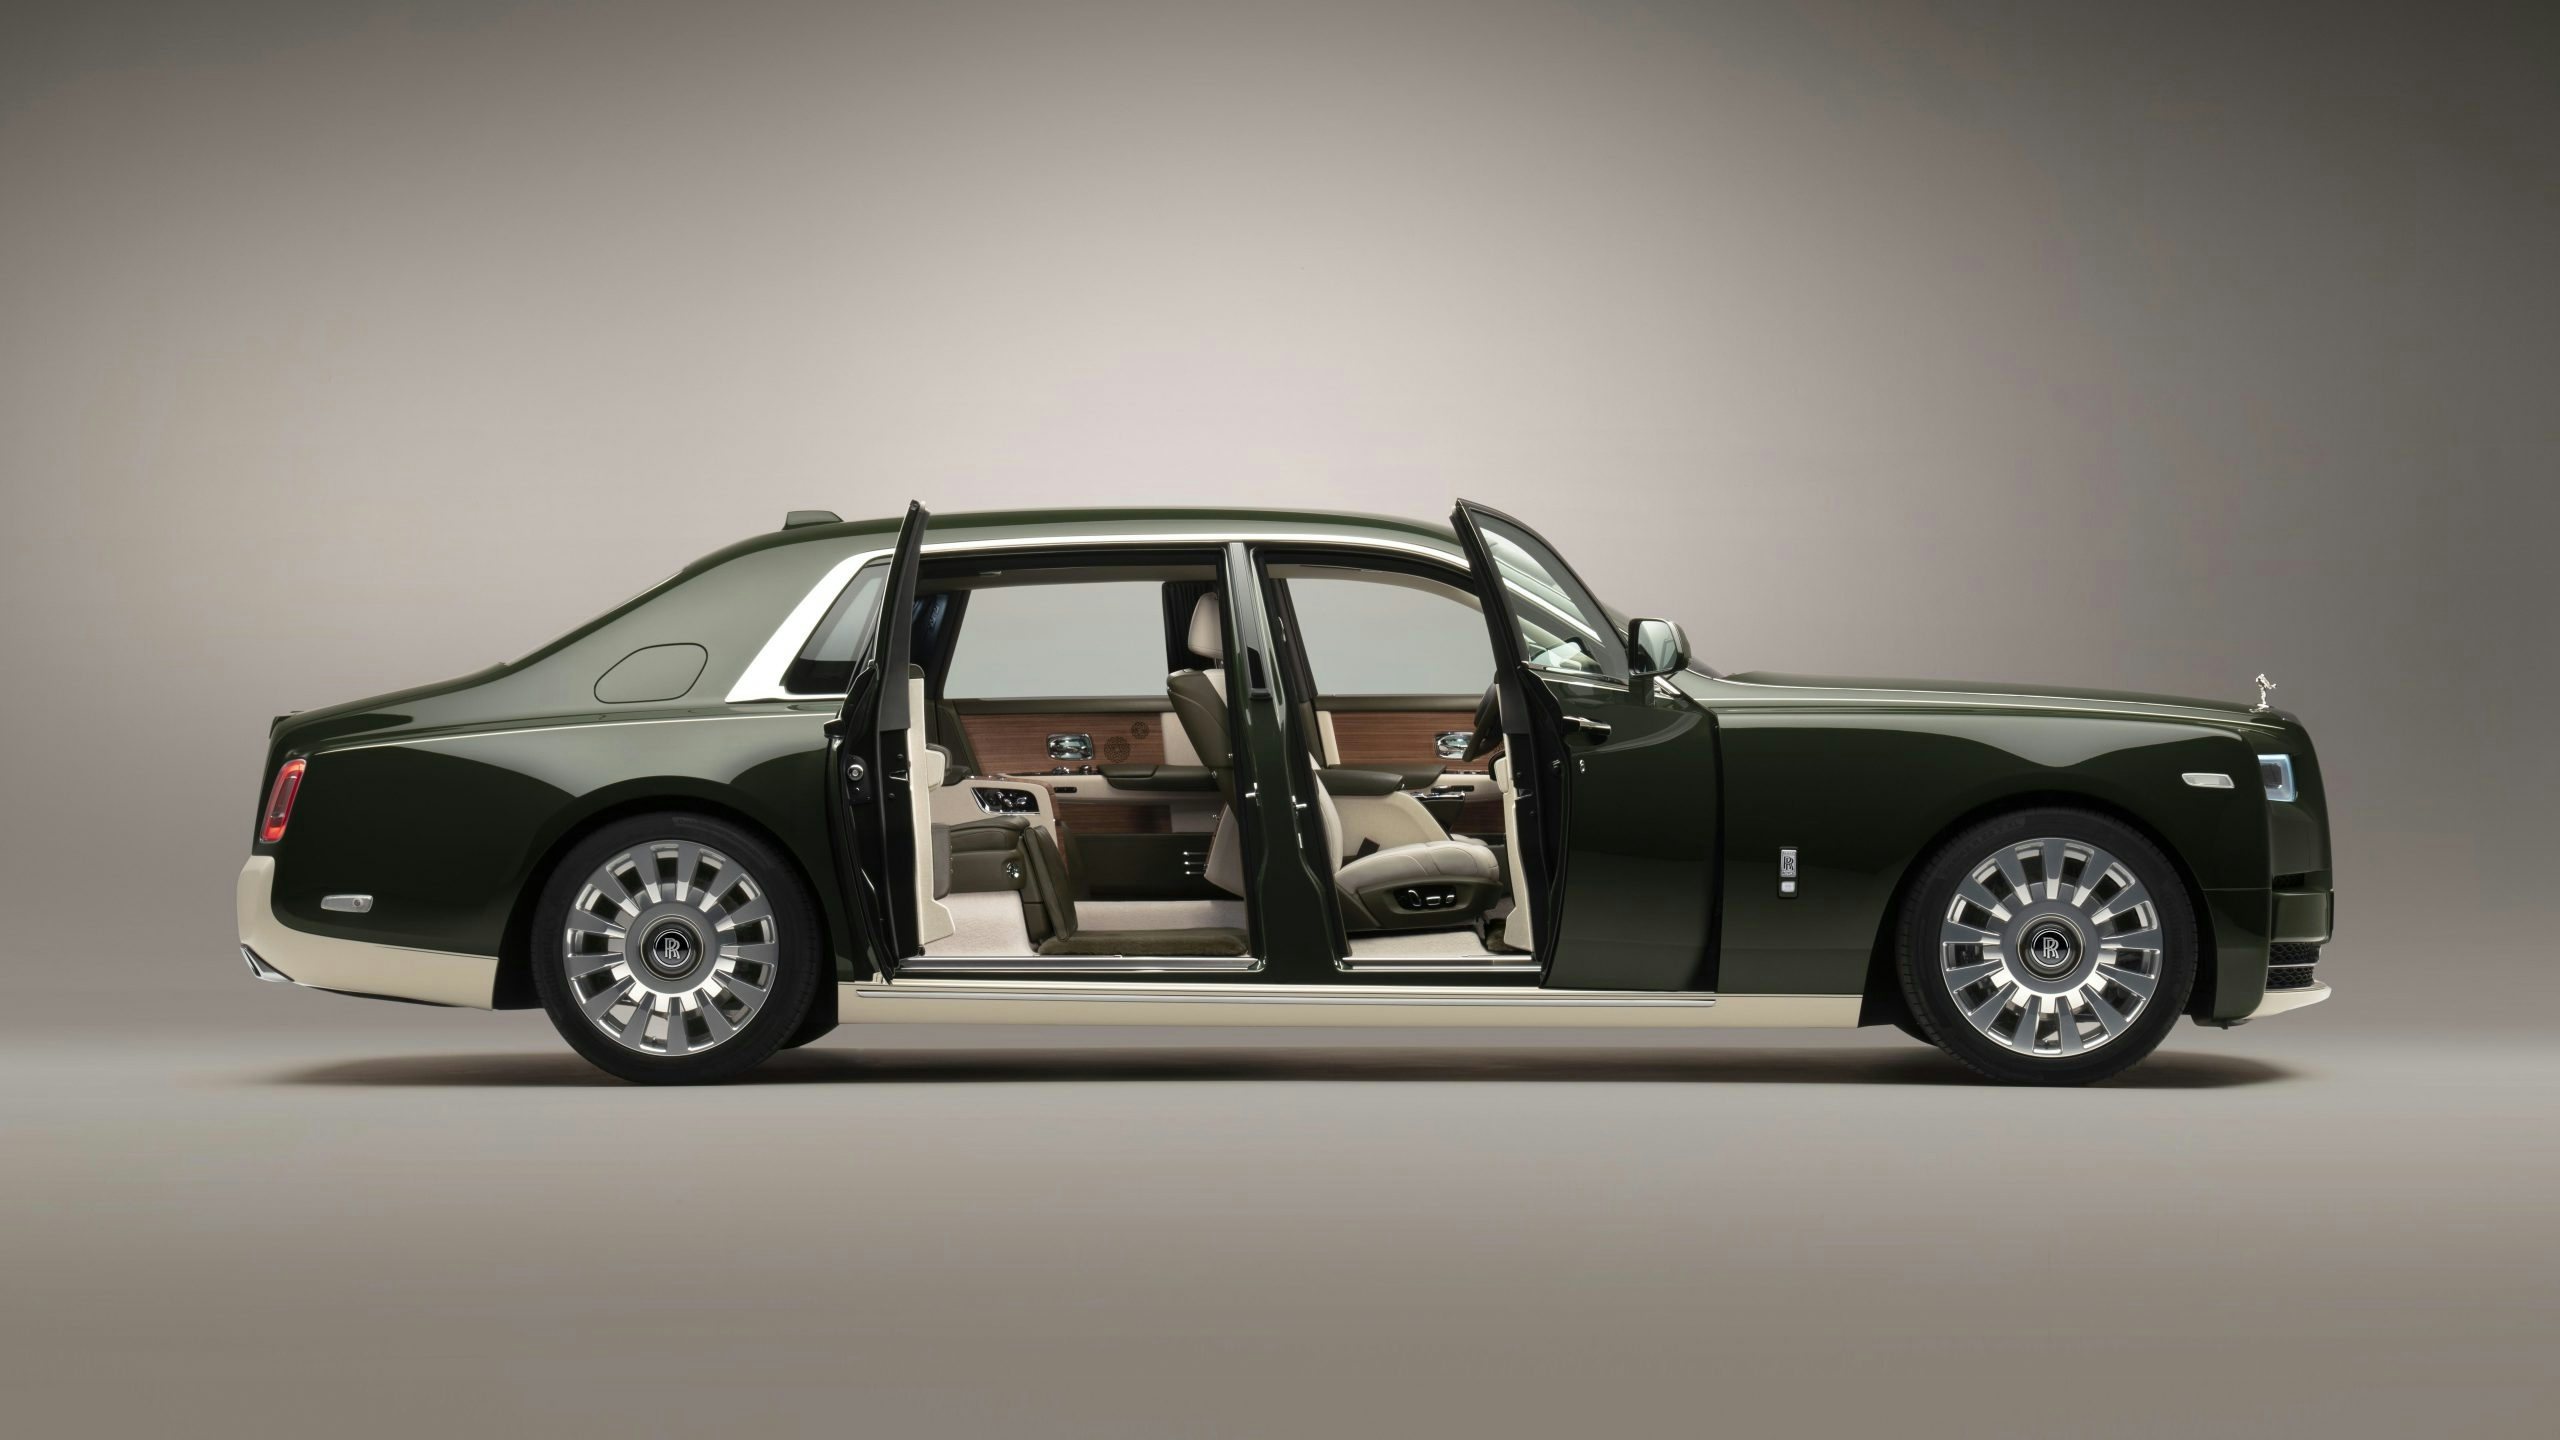 Rarely do two highly influential luxury brands unite to create something truly outstanding, but Rolls-Royce and Hermès have done just that. Photo: Courtesy of Rolls-Royce